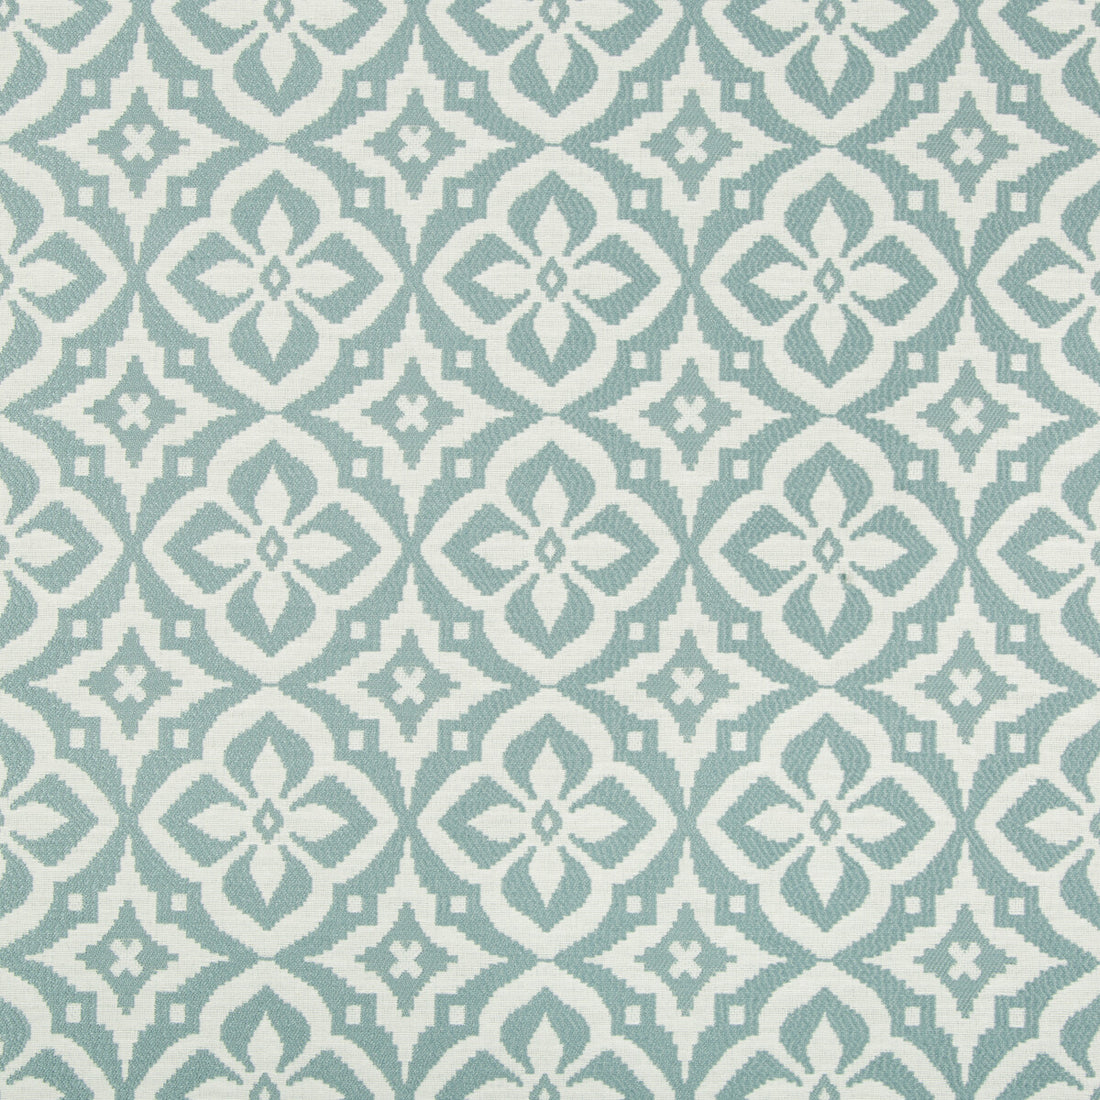 Kravet Contract fabric in 34757-15 color - pattern 34757.15.0 - by Kravet Contract in the Crypton Incase collection